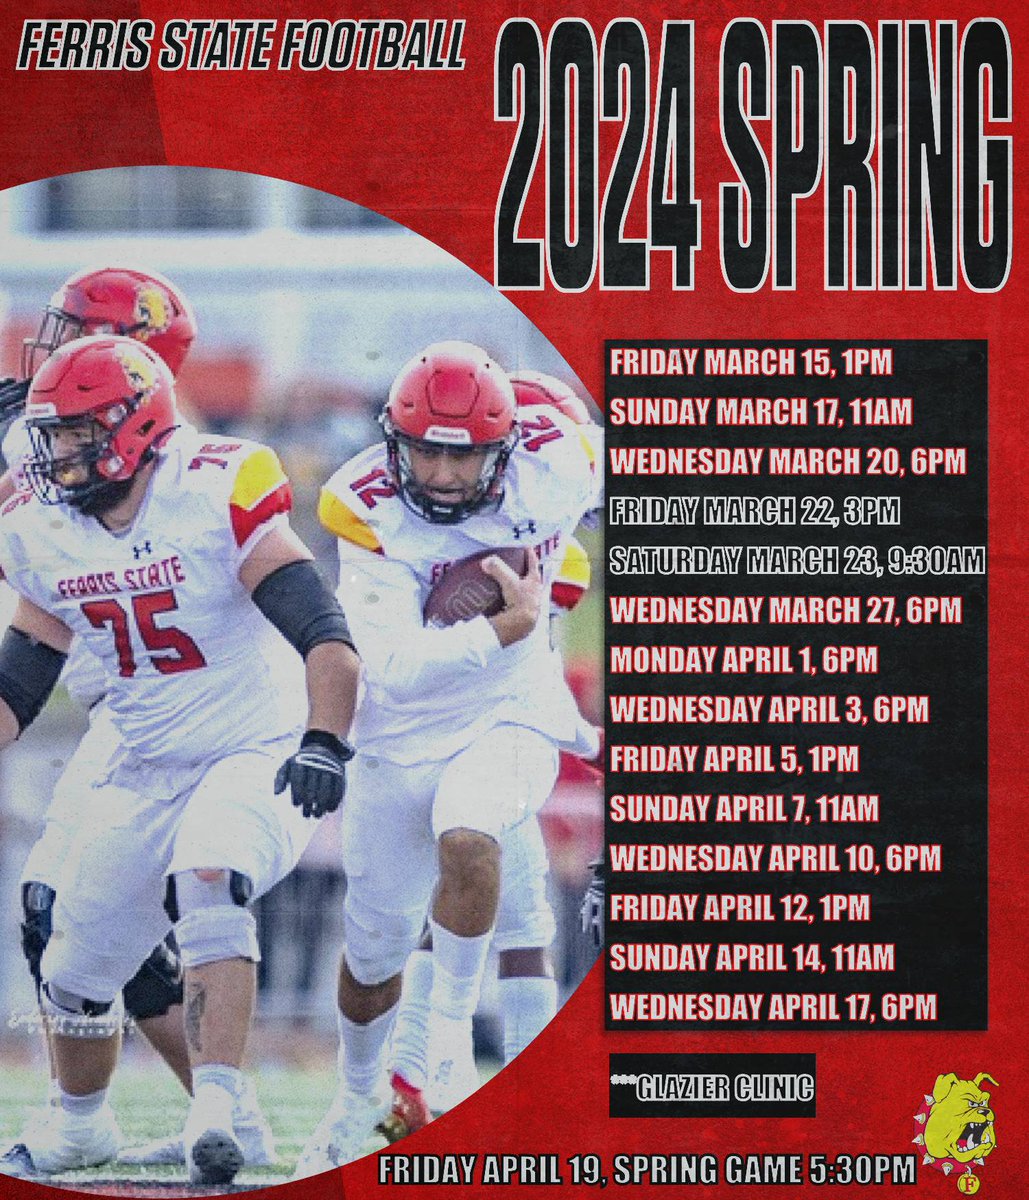 SPRING BALL STARTS TOMORROW. Coaches, we would love to have you out to come watch & learn. If you are interested in coming, please reach out. GO DAWGS!